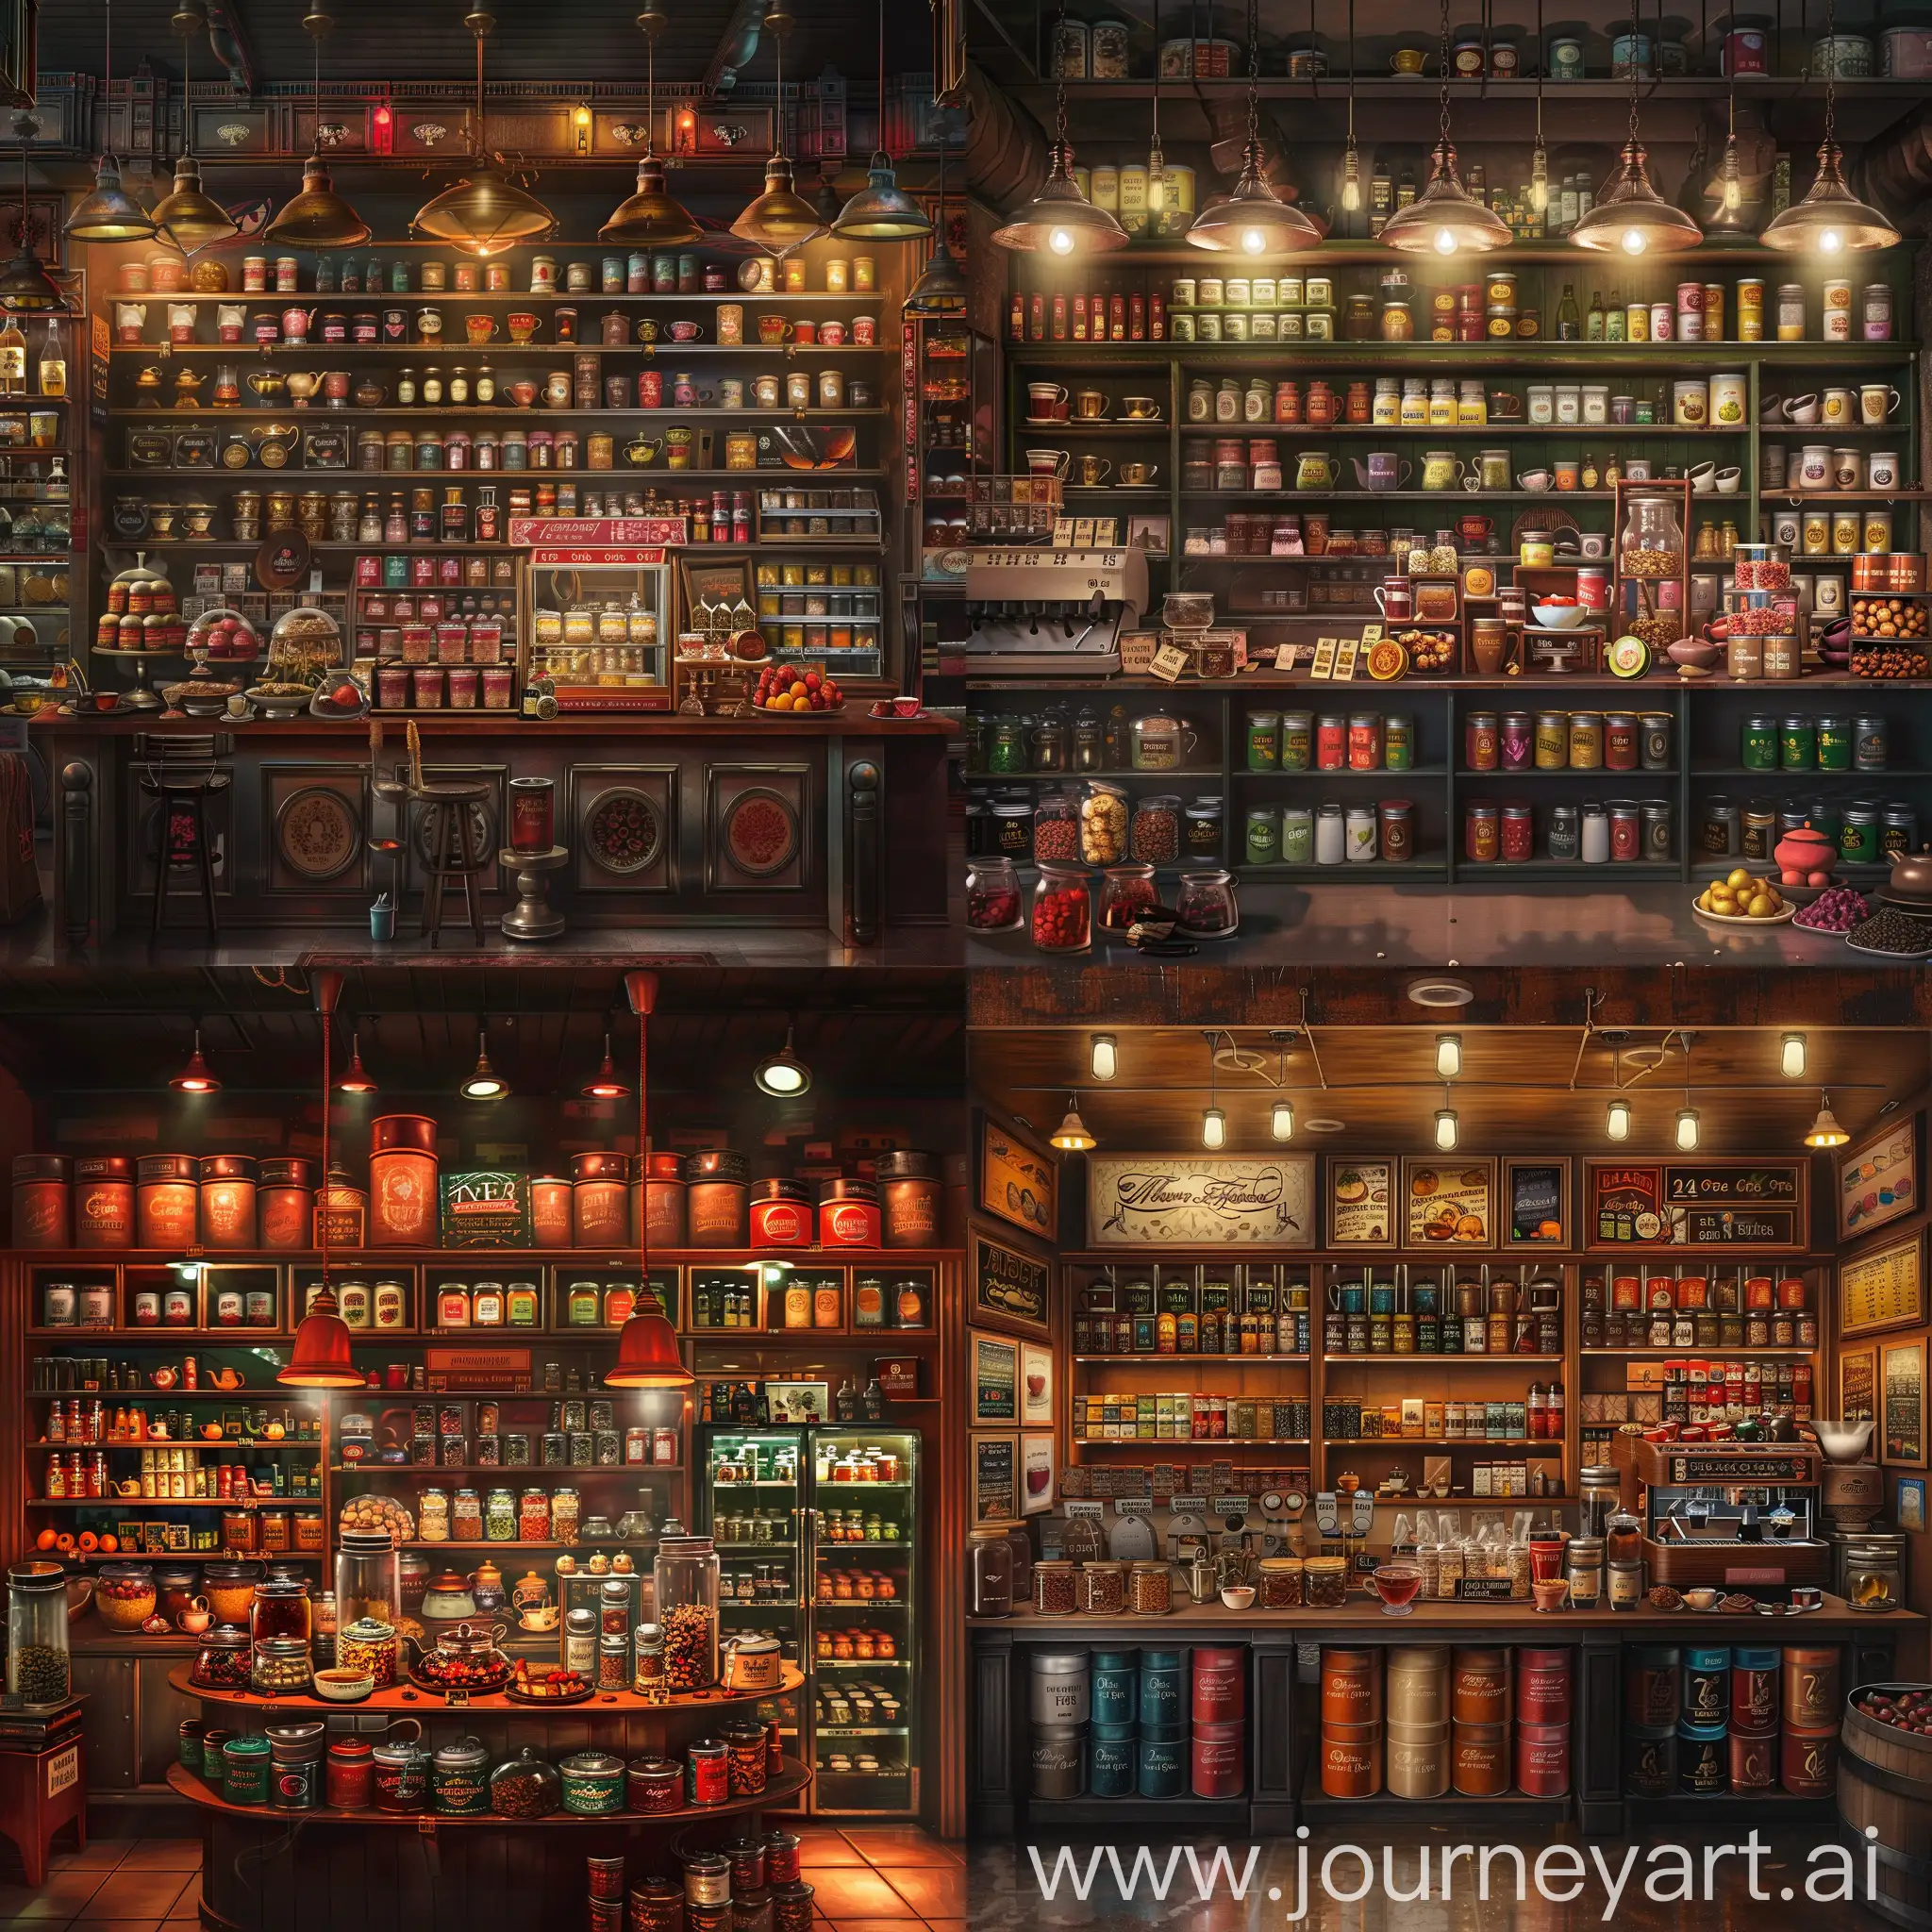 A realistic depiction of a tea shop with a magical atmosphere traveling through time, depicting teas in vast quantities, flavors and scents, (medium: photorealistic digital painting) (style: inspired by album cover art and concert posters from different eras)(lighting: stage lighting creating a warm , intimate, discreet atmosphere)(colors: rich and vivid, reflecting a magical mood)(composition: photos taken with a 24 mm wide-angle lens, capturing shelves, counters, tea cans and numerous accessories, coffees, chocolates, jars of juices, candied fruits) ar-- 20:9